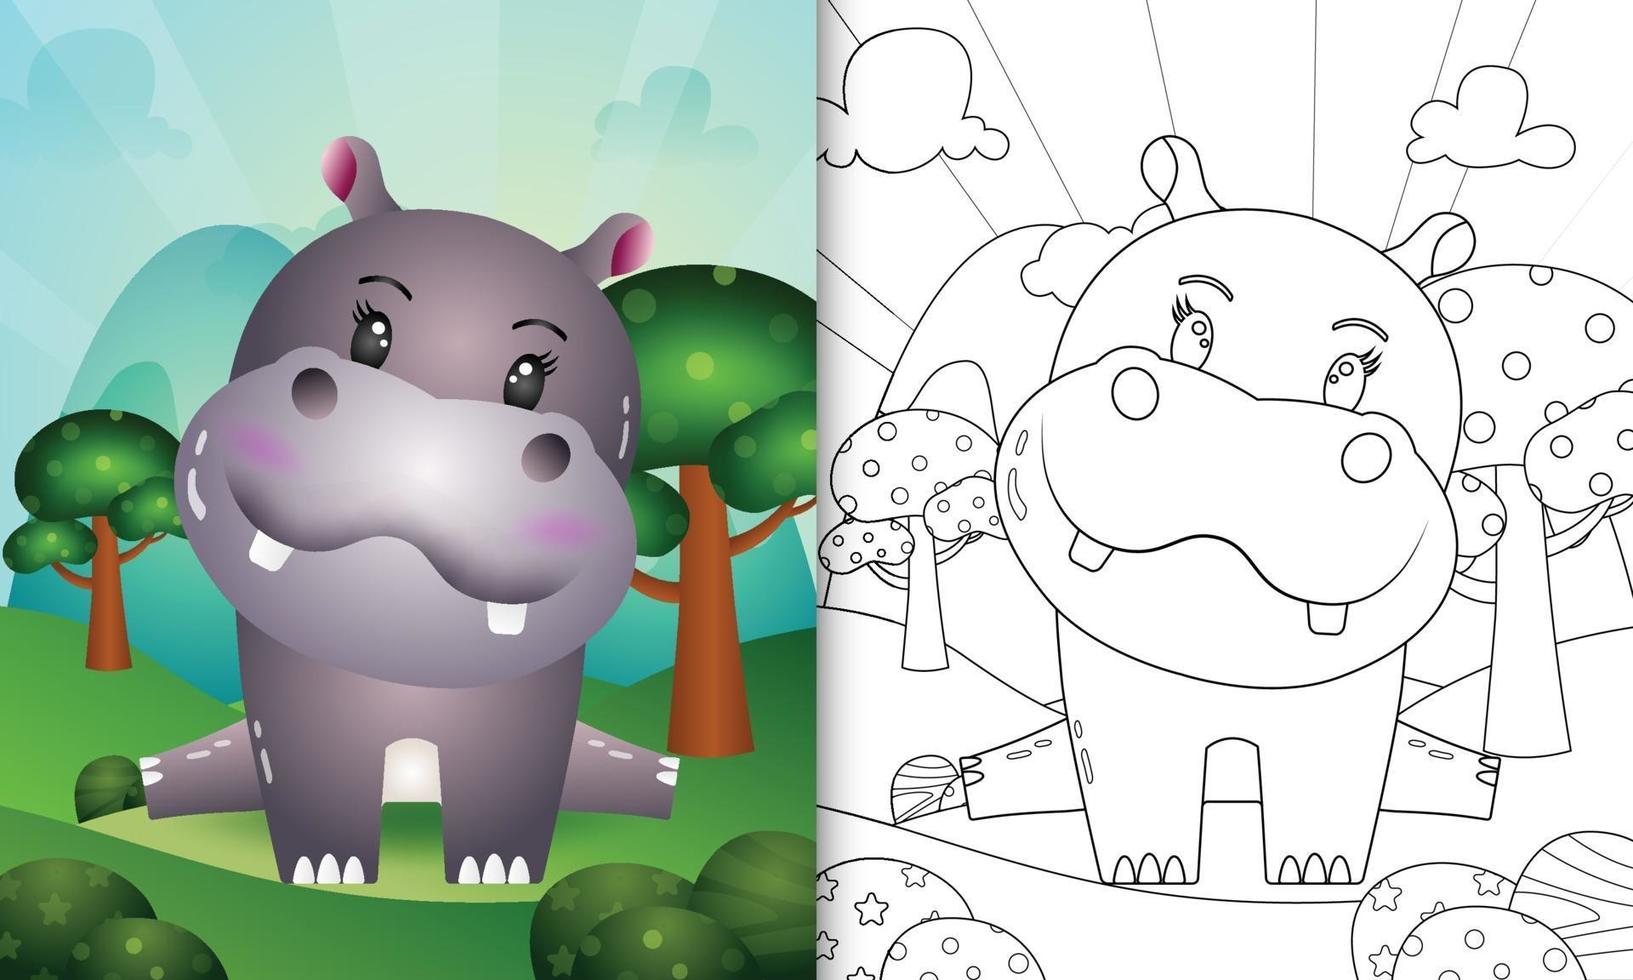 coloring book for kids with a cute hippo character illustration vector